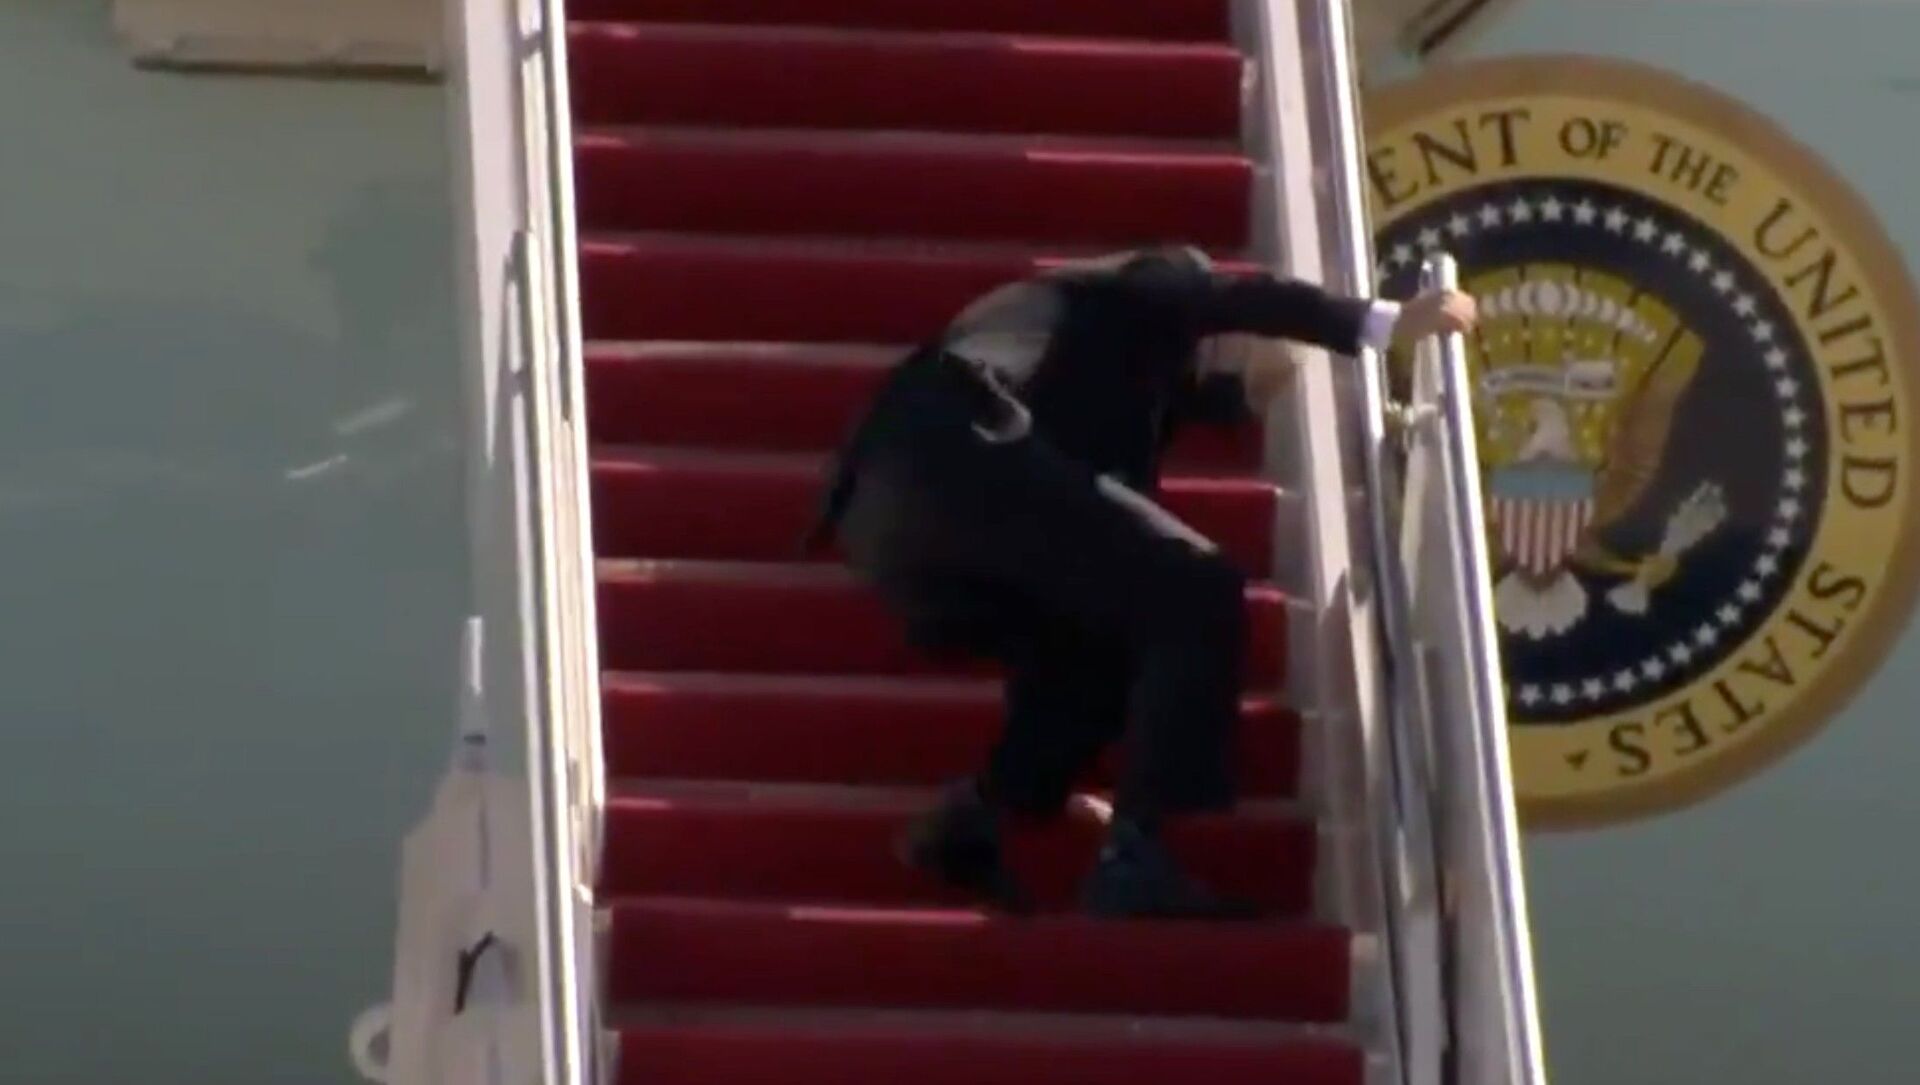 Screenshot captures the moment that US President Joe Biden caught himself after stumbling three times while ascending the airstairs to board Air Force Once. - Sputnik International, 1920, 19.03.2021